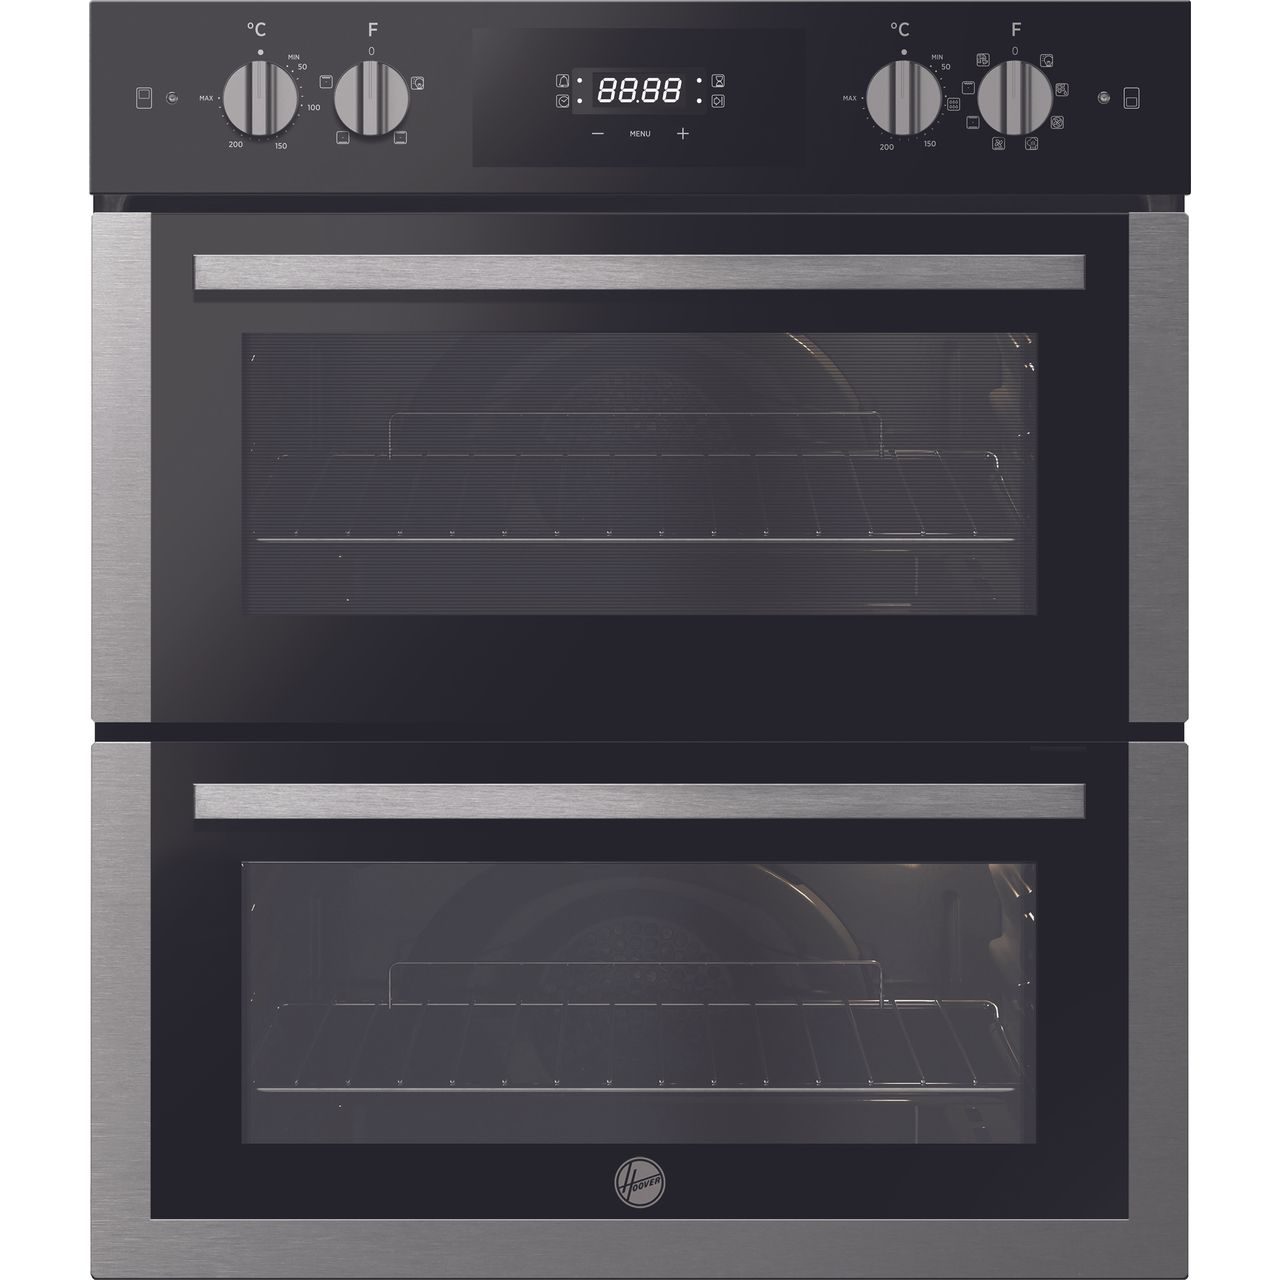 Hoover H-OVEN 300 HO7DC3UB308BI Built Under Double Oven Review